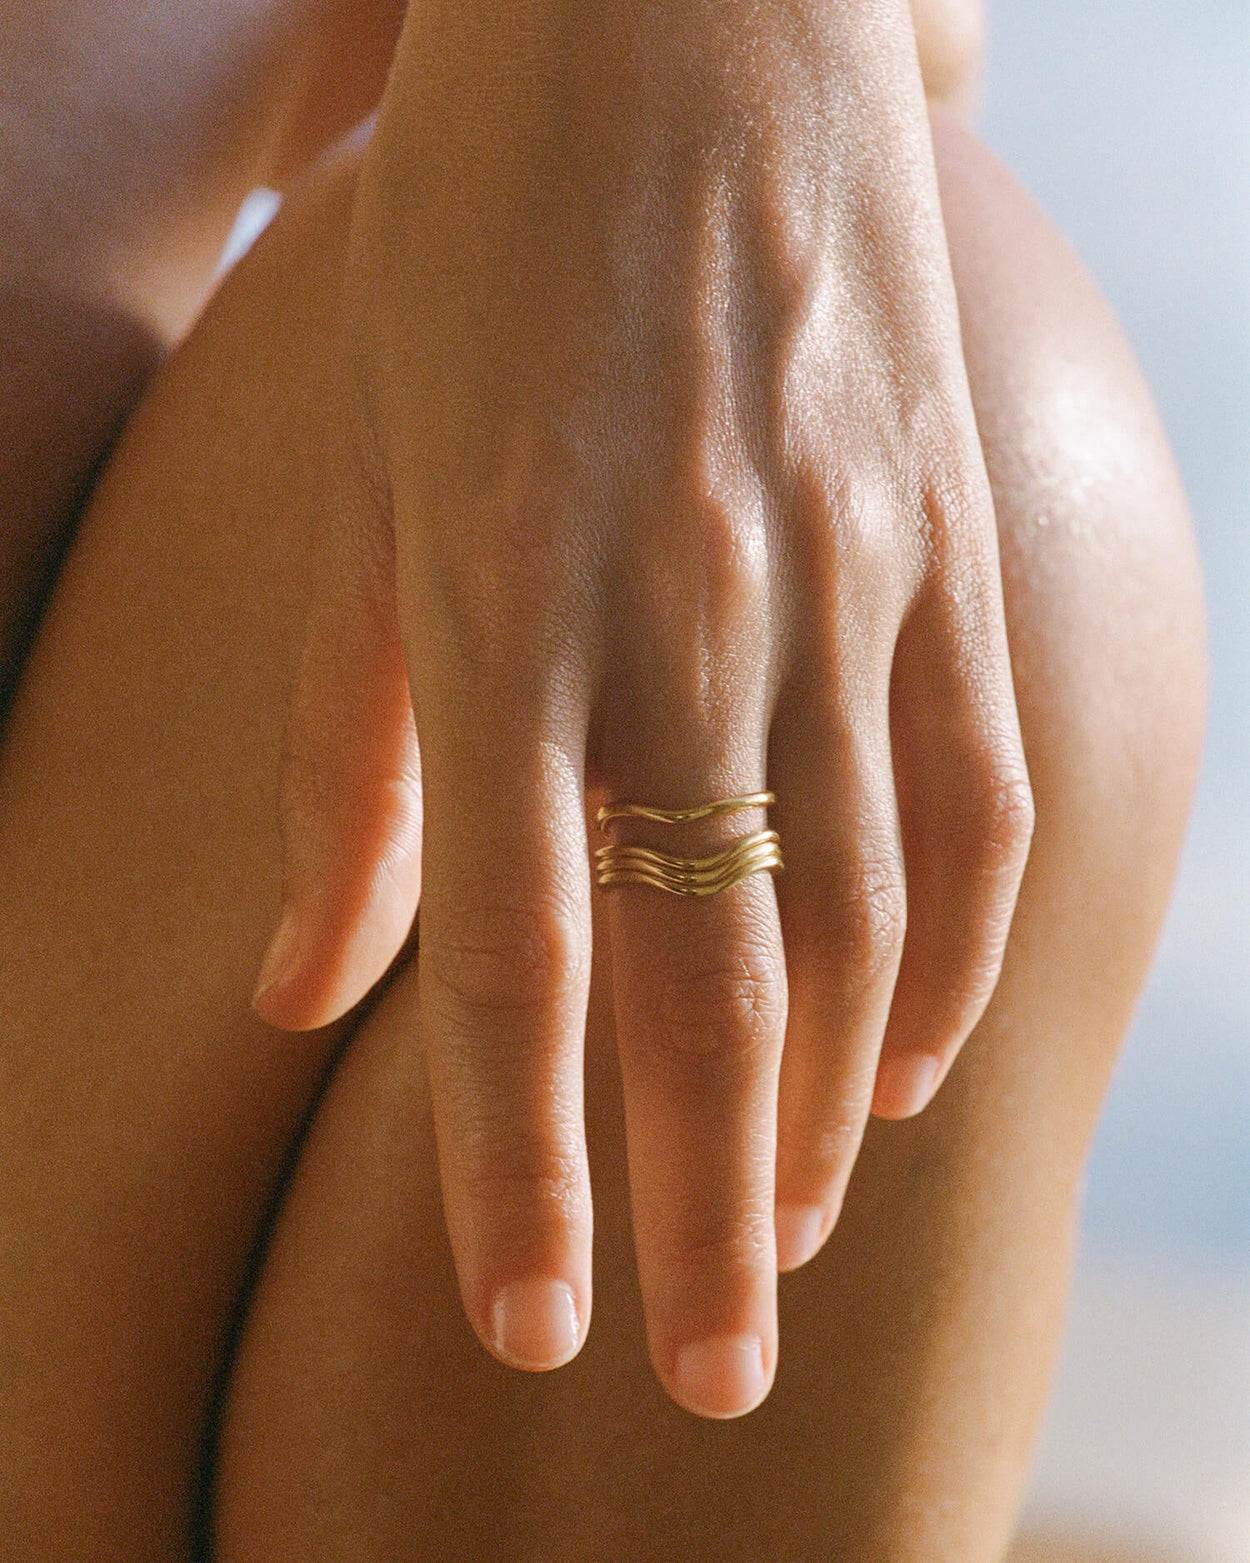 VACATION RING (18K GOLD VERMEIL)